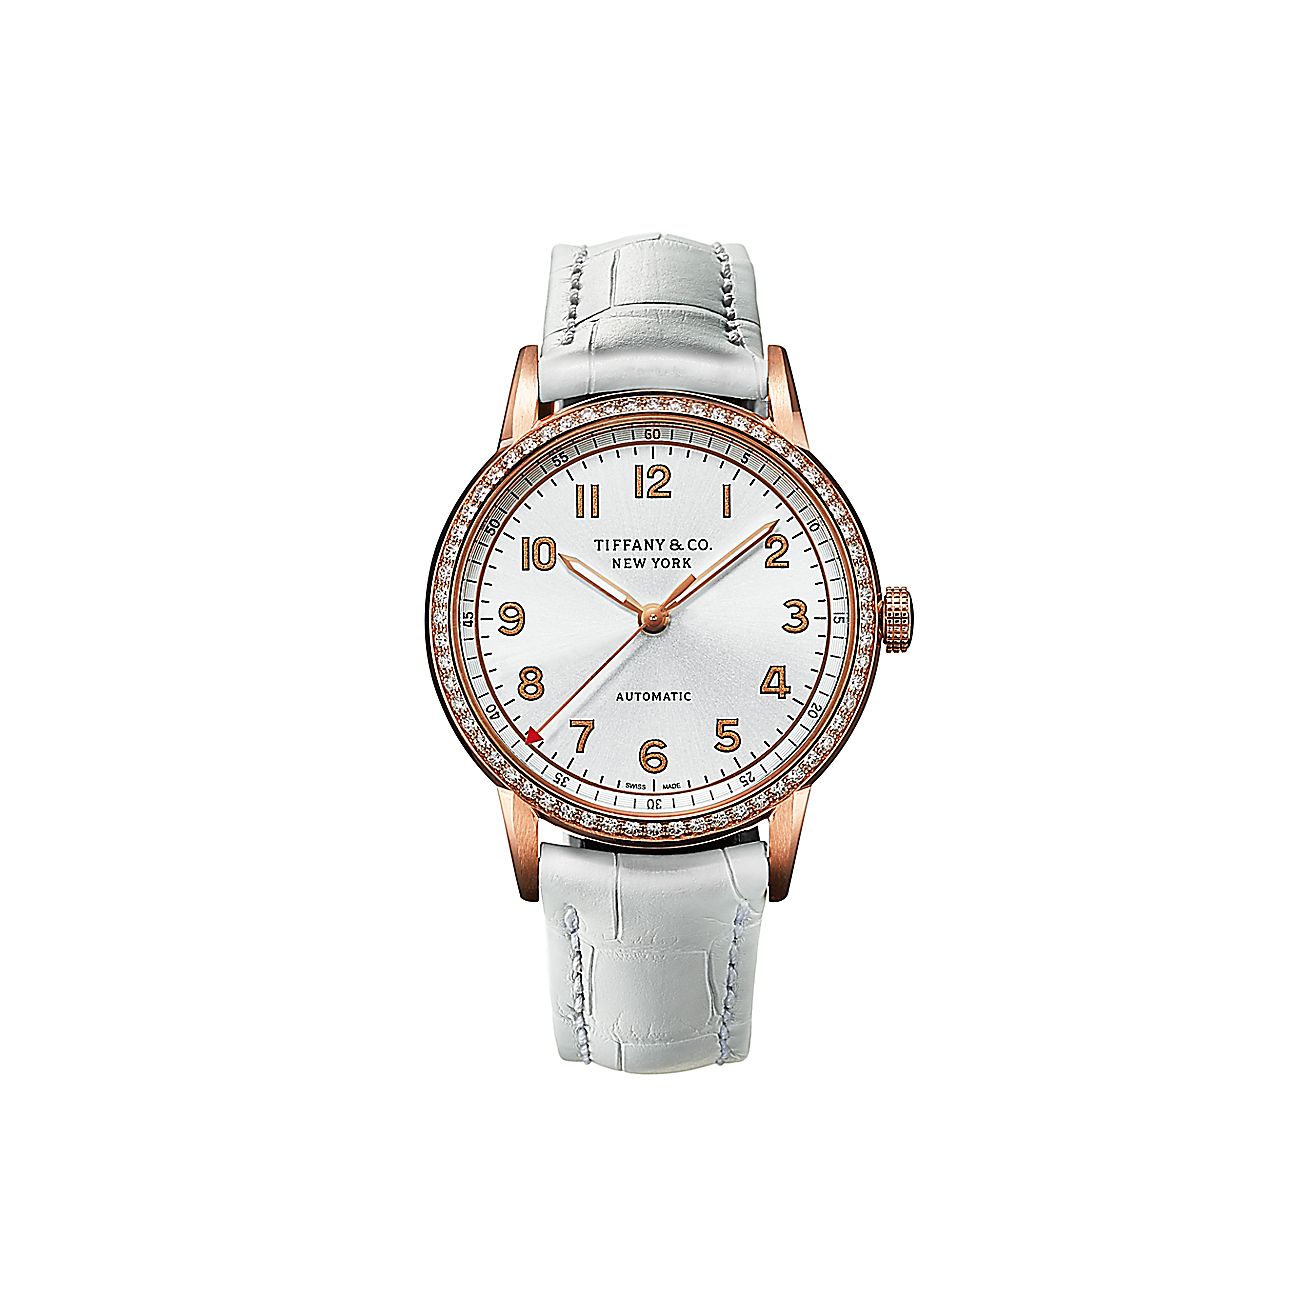 Tiffany CT60® 34 mm women's watch in 18k rose gold with diamonds